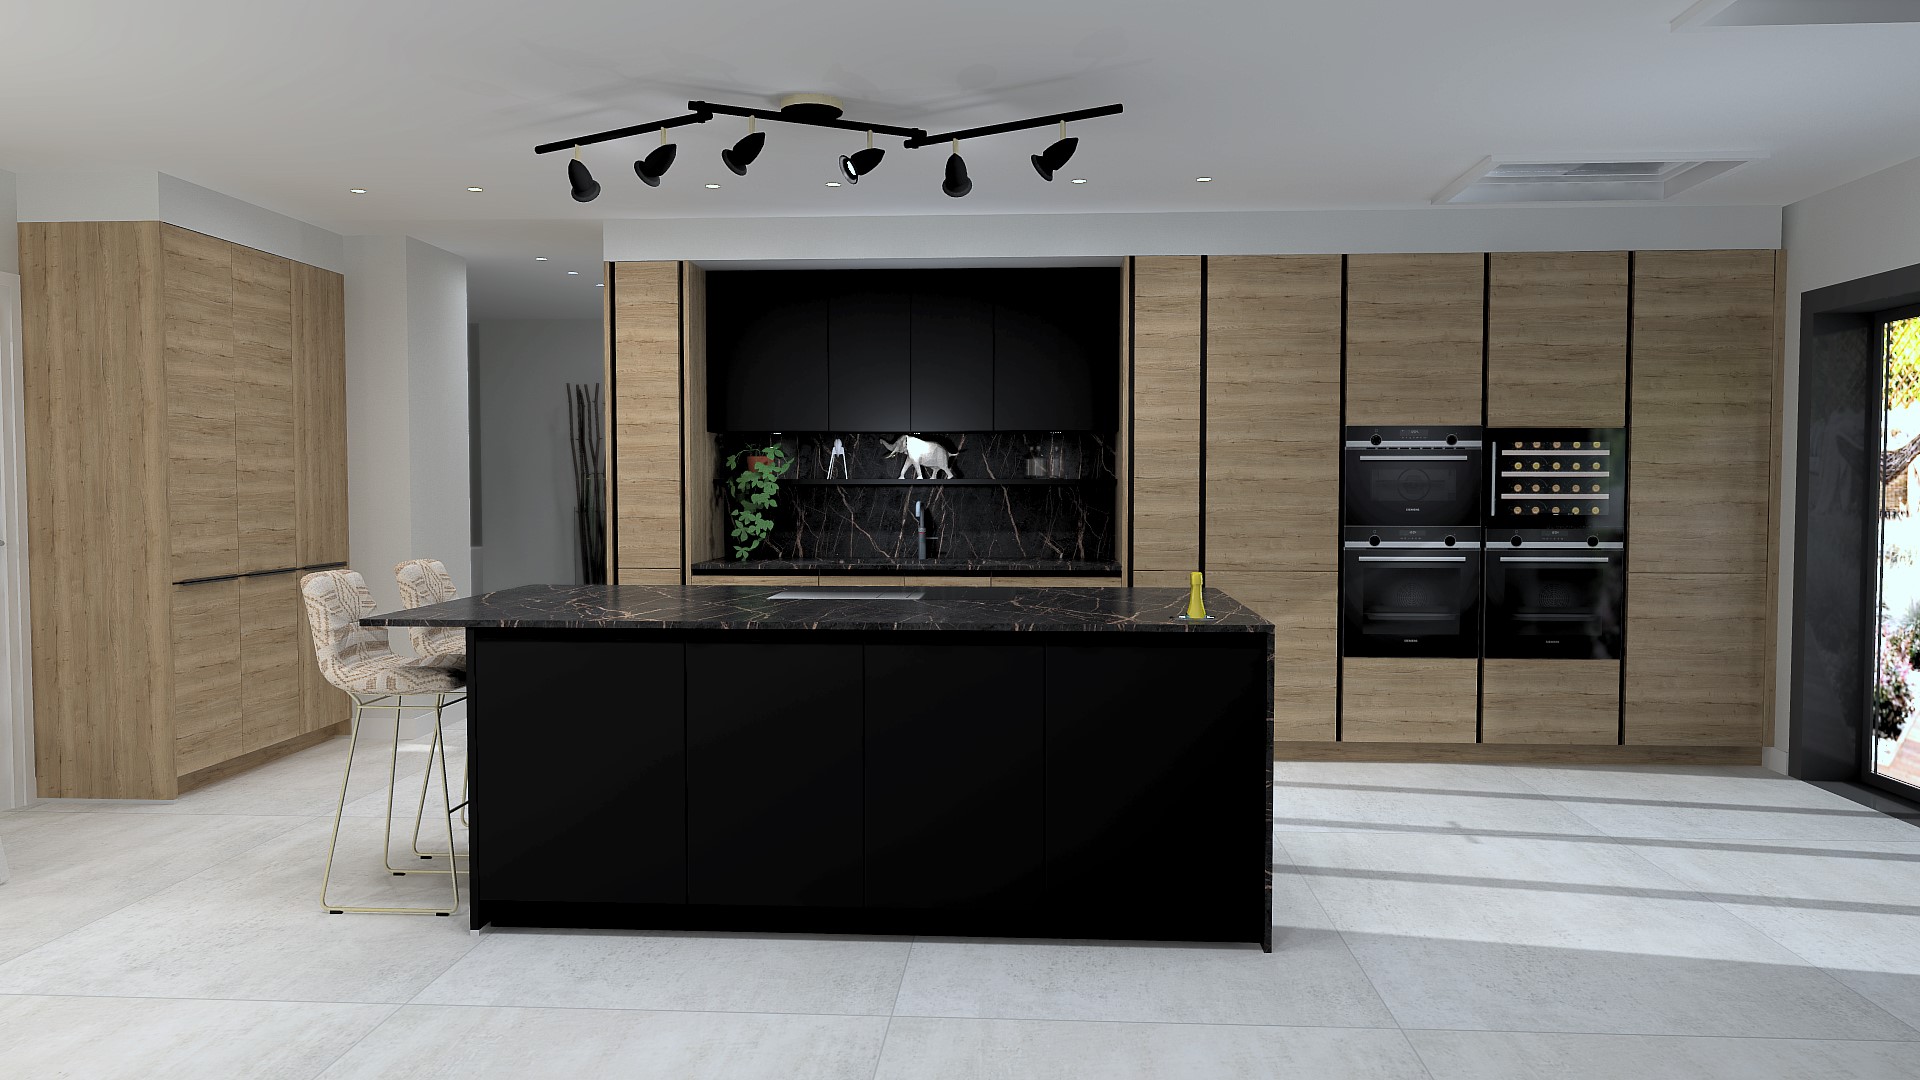 Nature's Beauty, Modern Style: A breath-taking kitchen design featuring natural wood cabinetry, striking black accents, and statement worktops that seamlessly blend form and function."